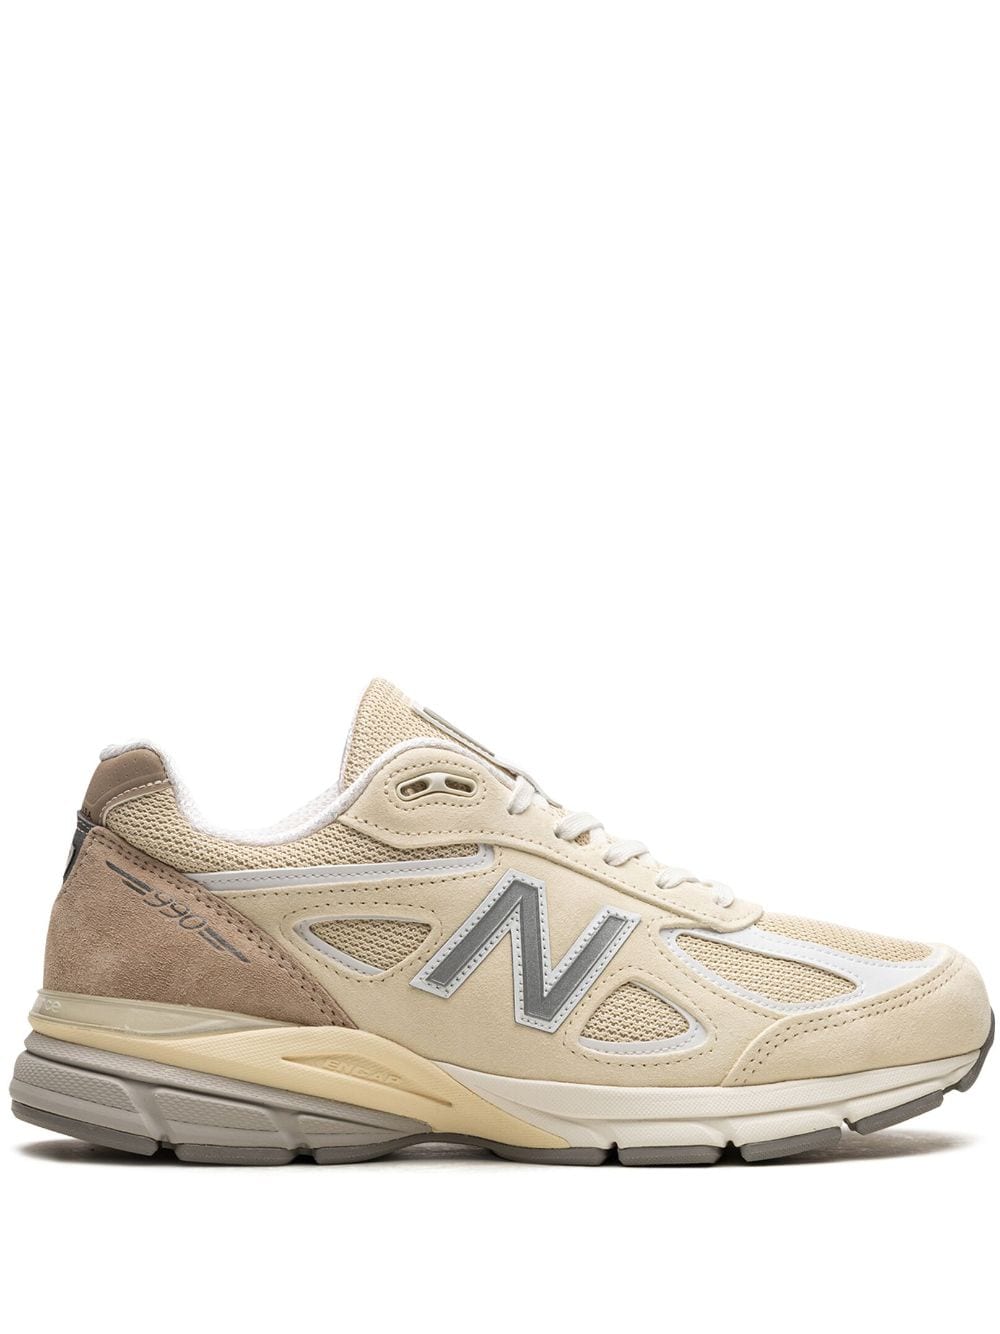 New Balance Made in USA 990v4 "Cream" sneakers - Neutrals